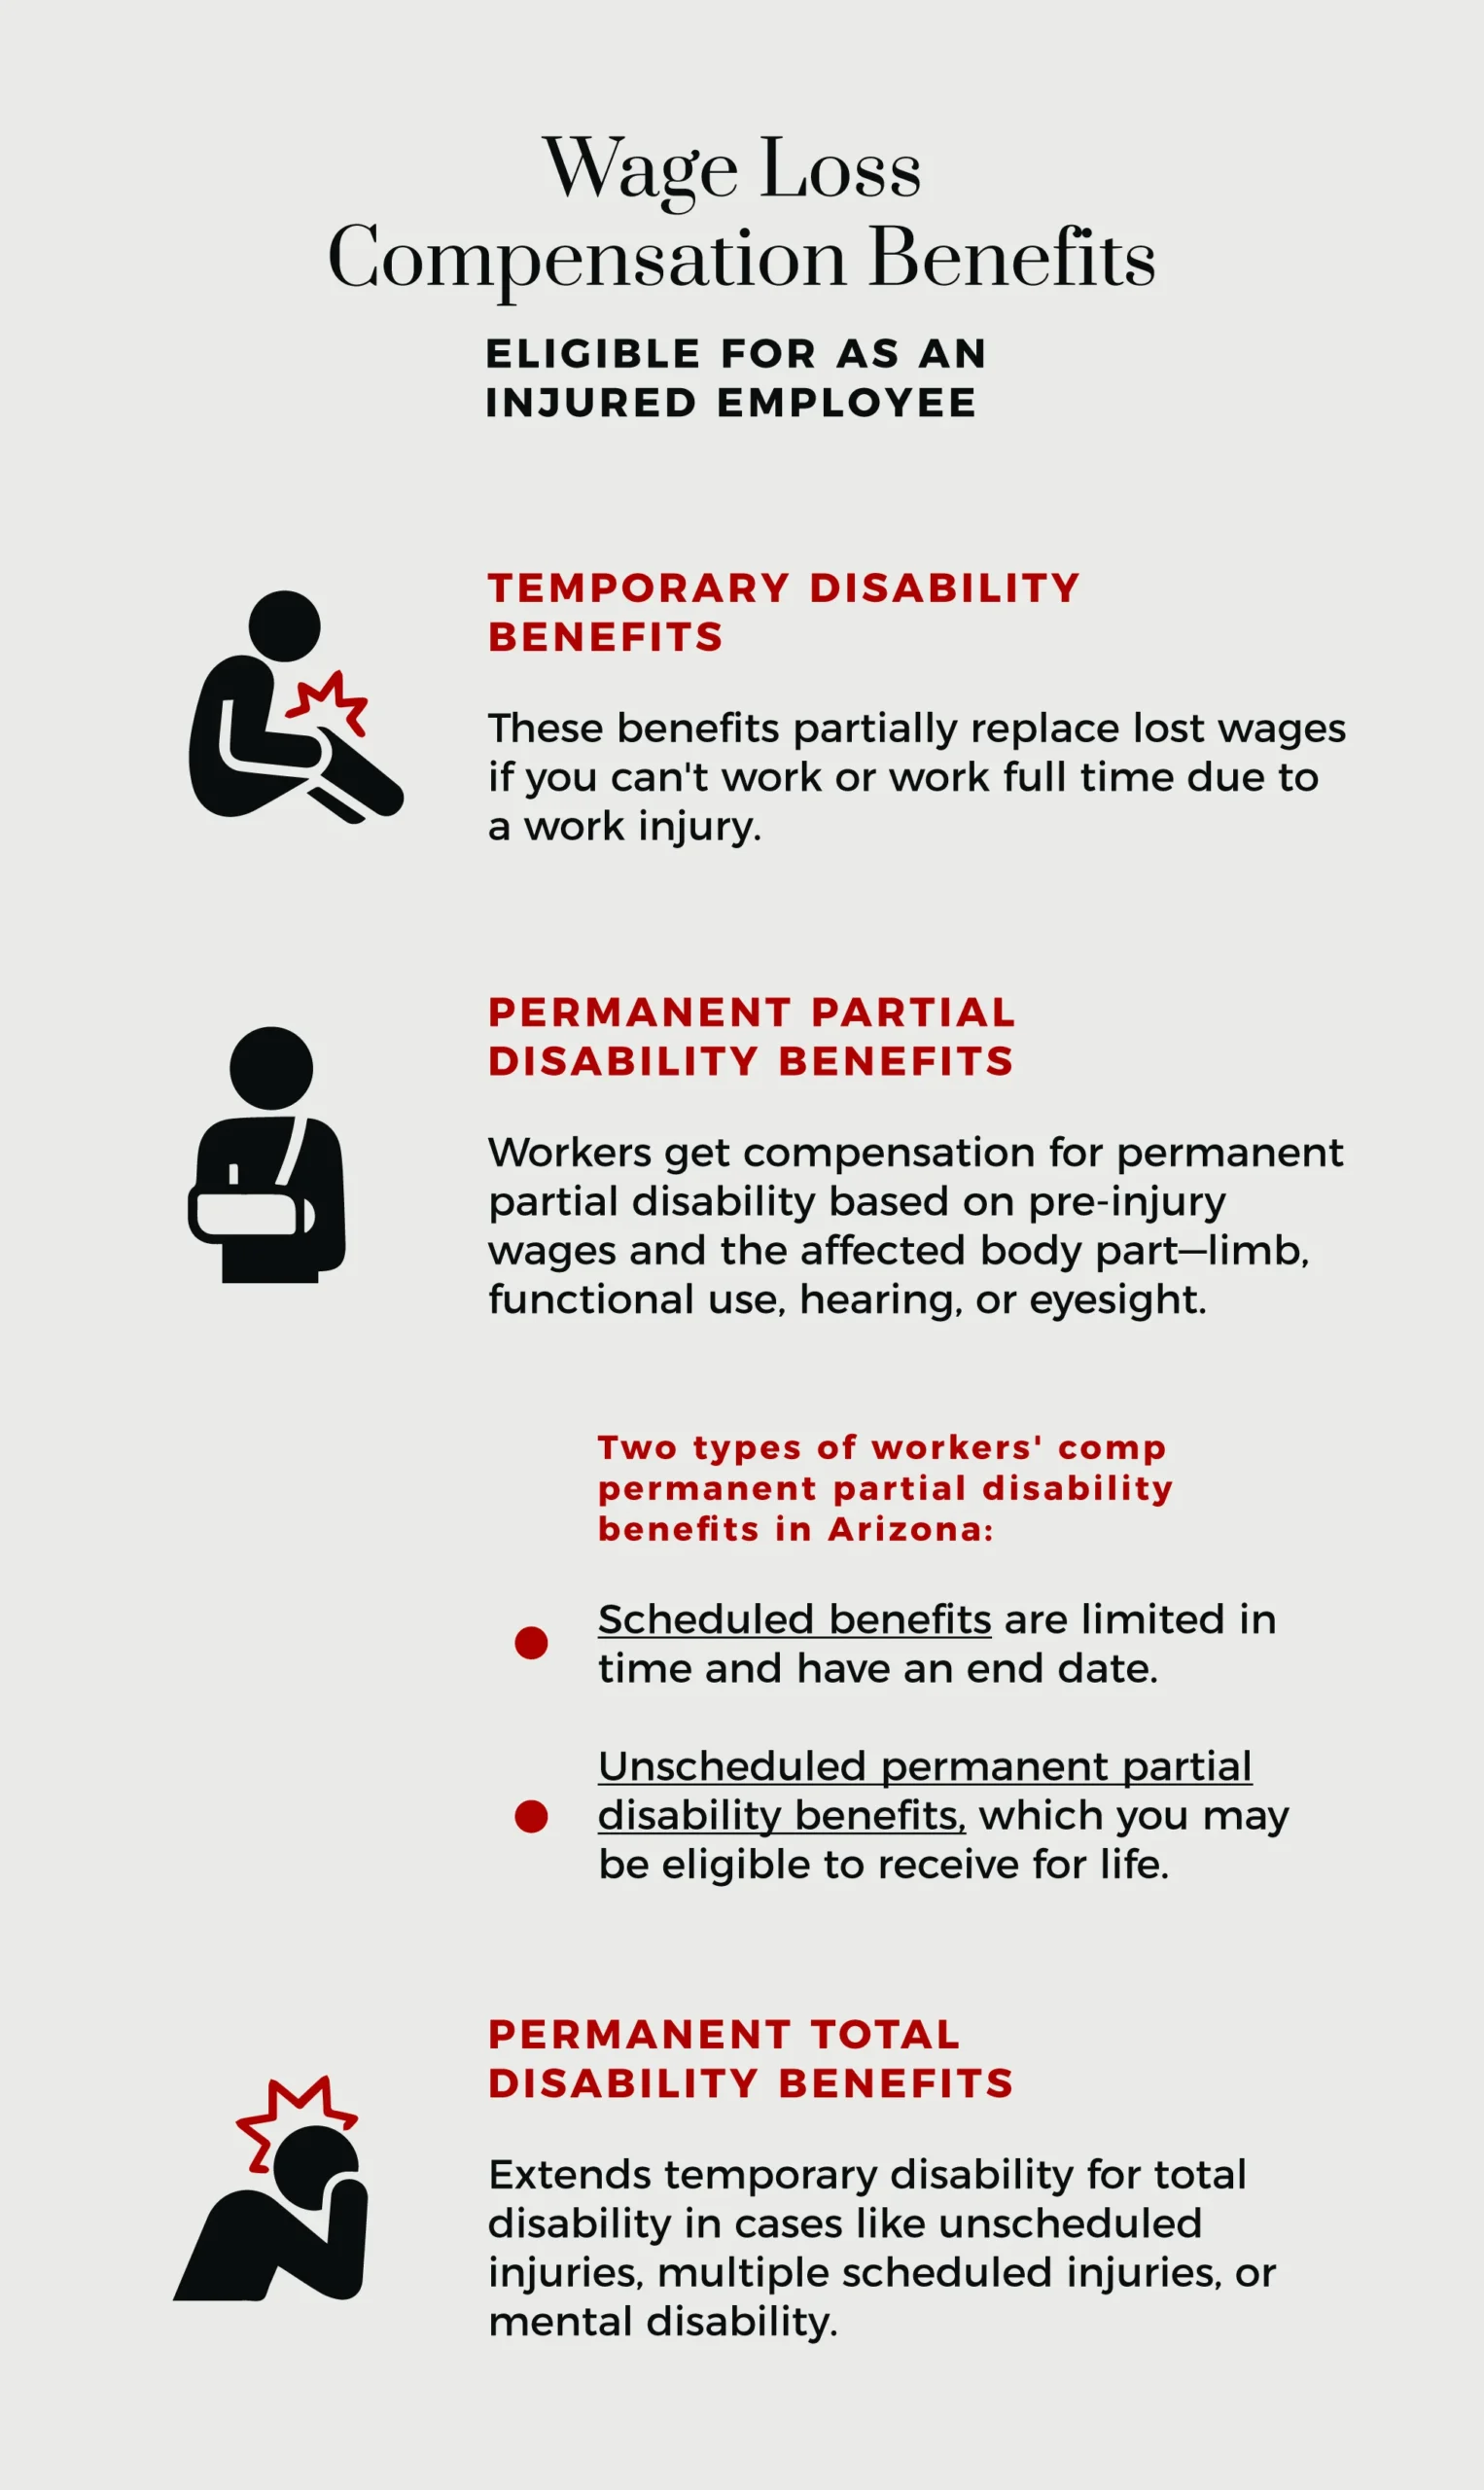 wage loss compensation benefits eligible for as an injured employee